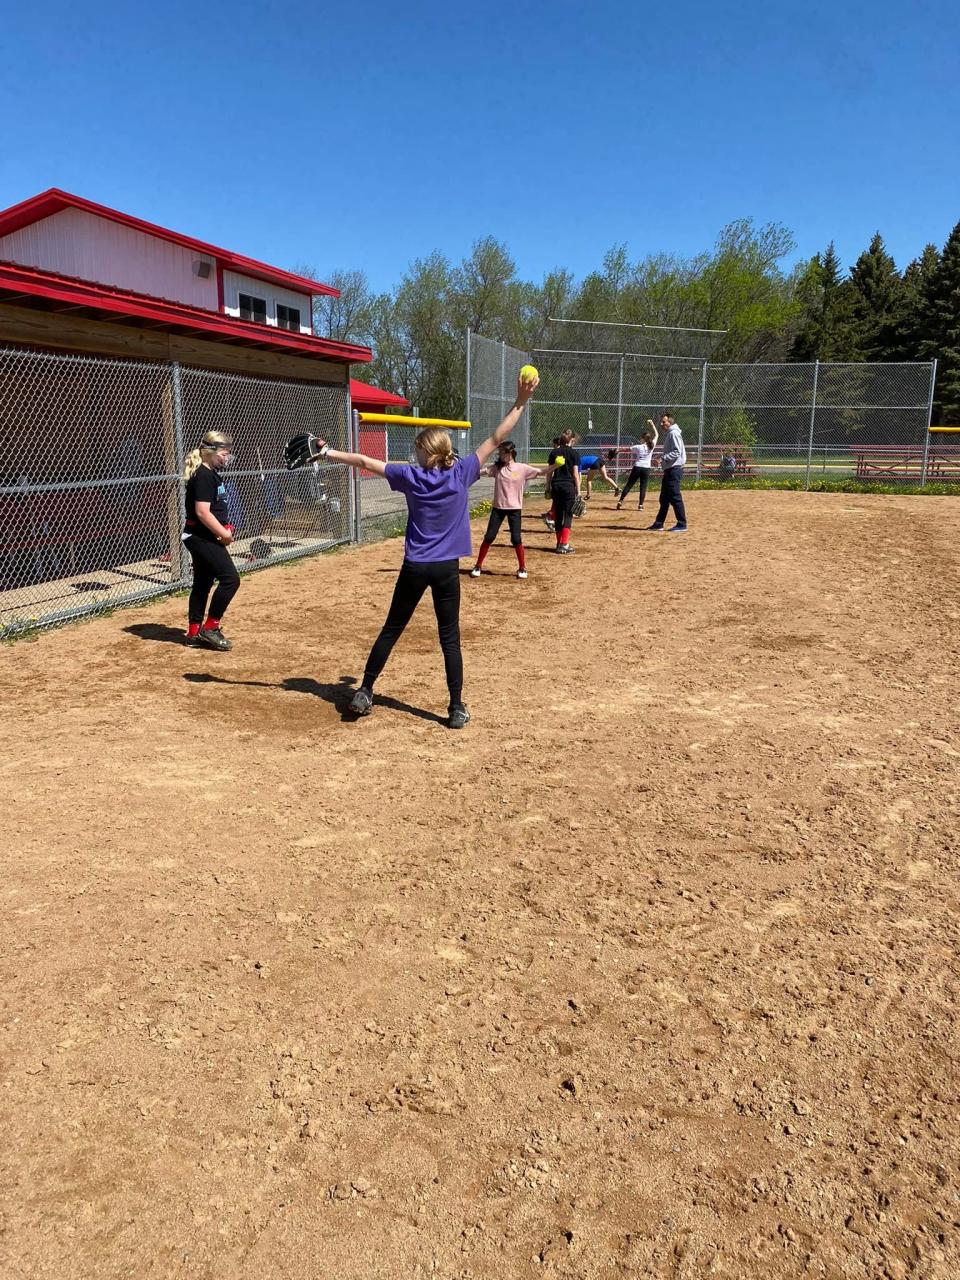 Devils Lake Youth Fastpitch practices on the field.